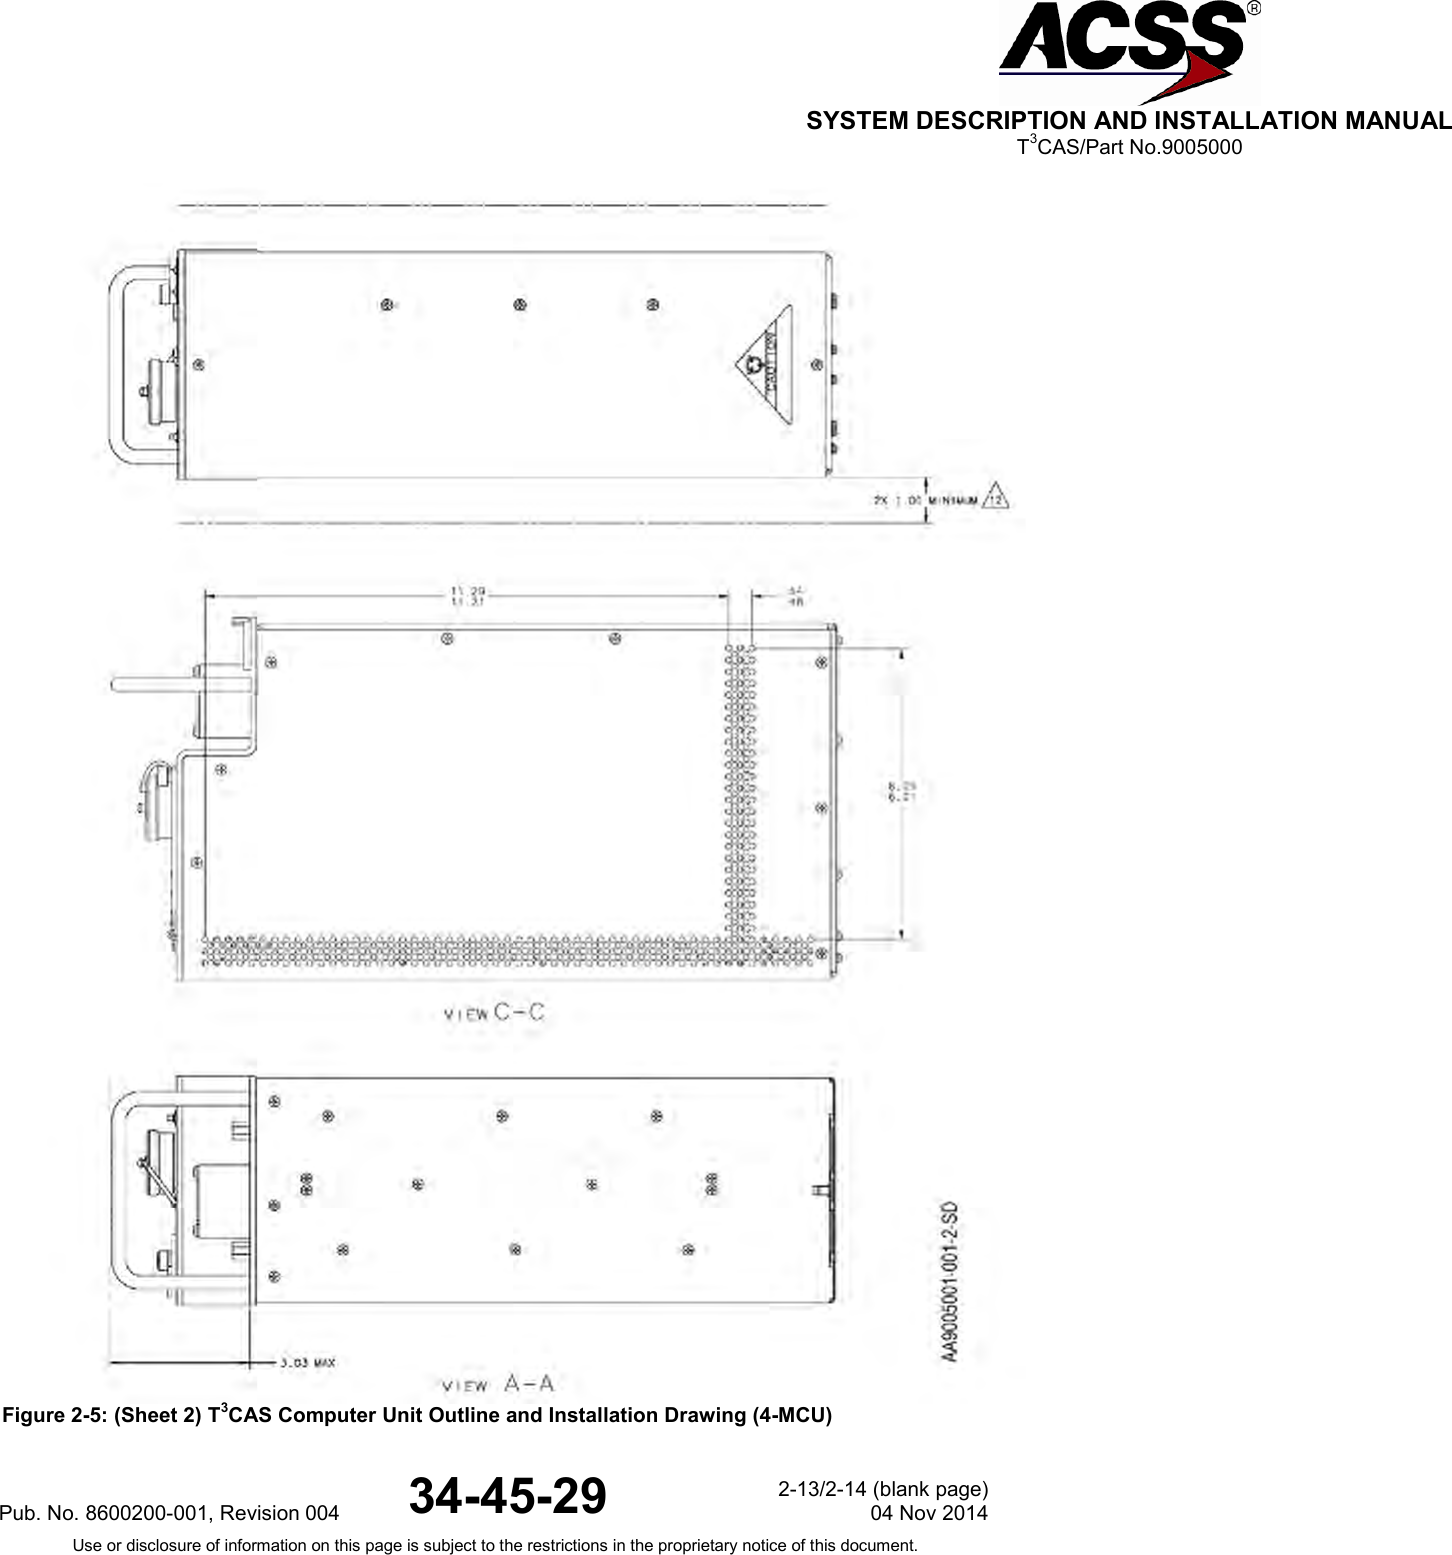  SYSTEM DESCRIPTION AND INSTALLATION MANUAL T3CAS/Part No.9005000  Figure 2-5: (Sheet 2) T3CAS Computer Unit Outline and Installation Drawing (4-MCU)Pub. No. 8600200-001, Revision 004 34-45-29 2-13/2-14 (blank page) 04 Nov 2014 Use or disclosure of information on this page is subject to the restrictions in the proprietary notice of this document.  